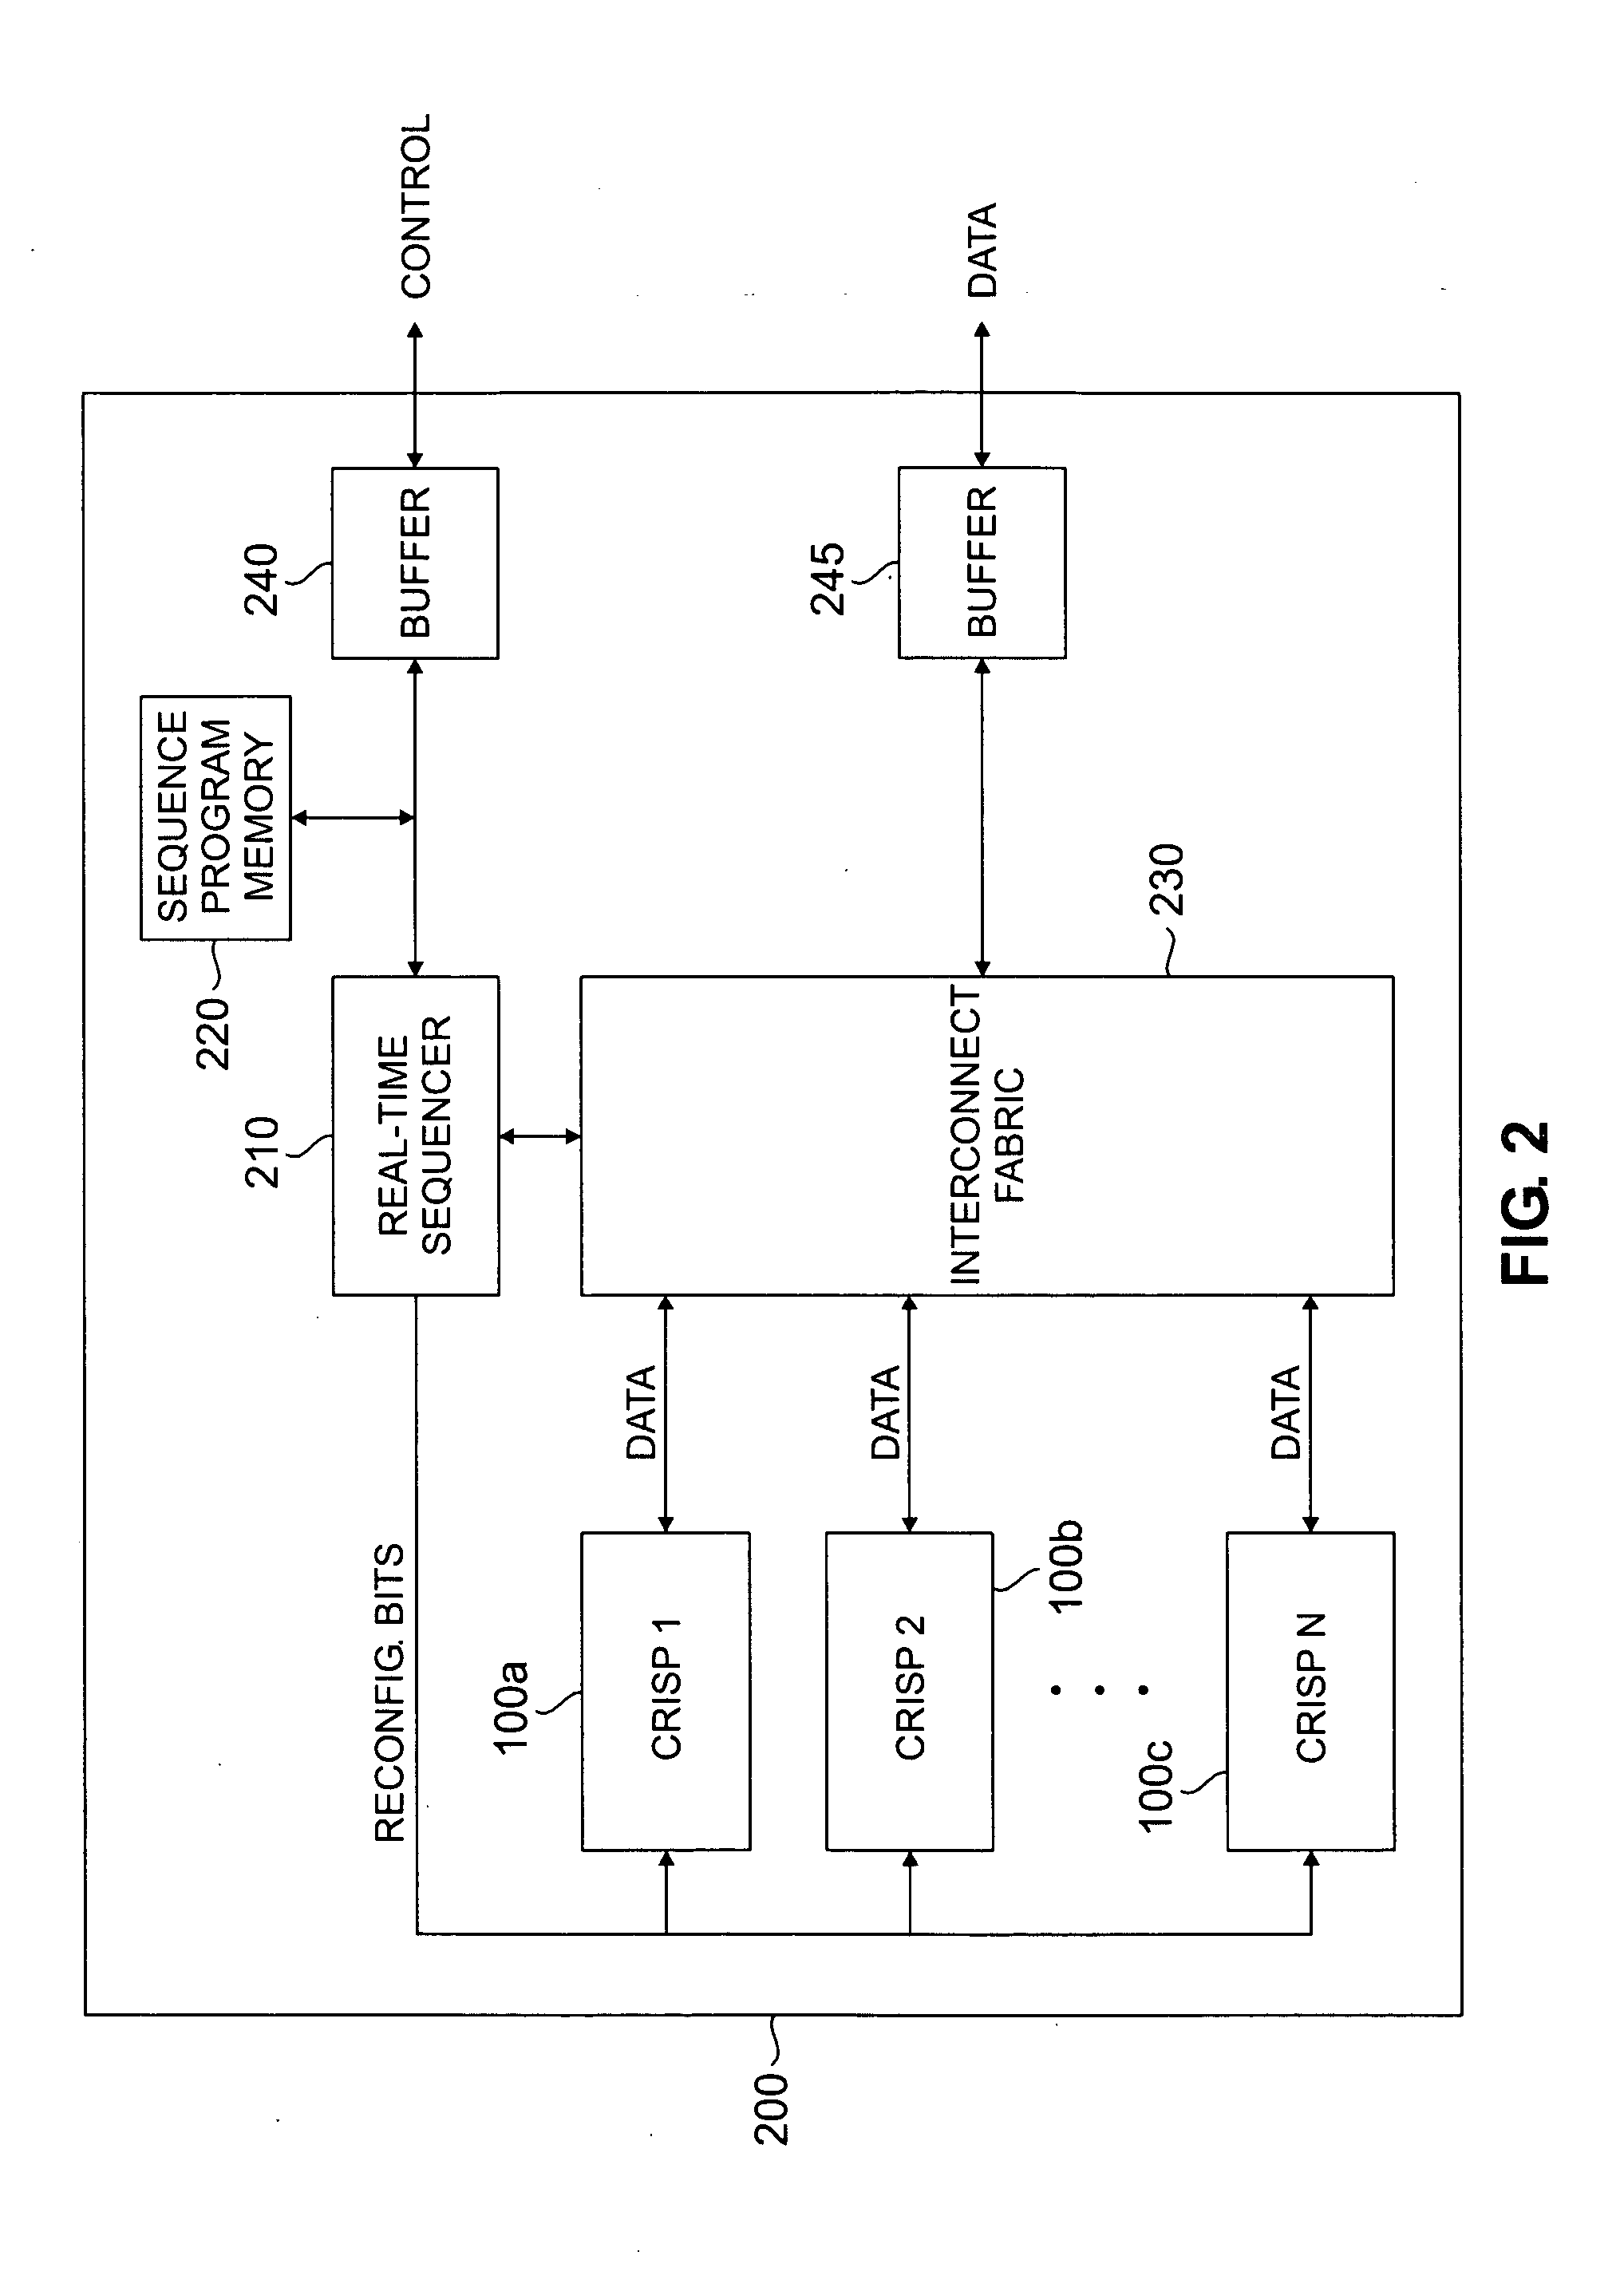 Turbo decoder architecture for use in software-defined radio systems